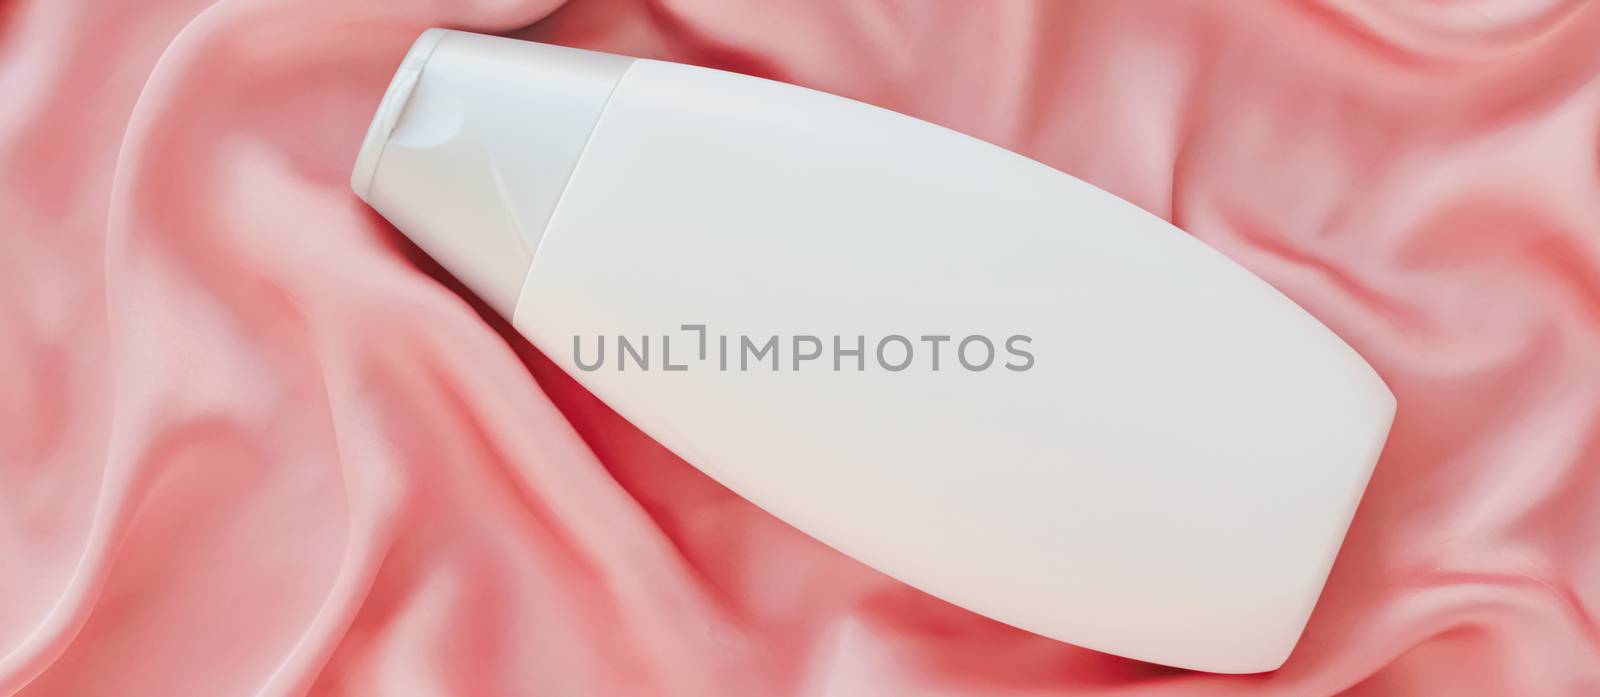 Blank label cosmetic container bottle as product mockup on pink silk background, hygiene and healthcare